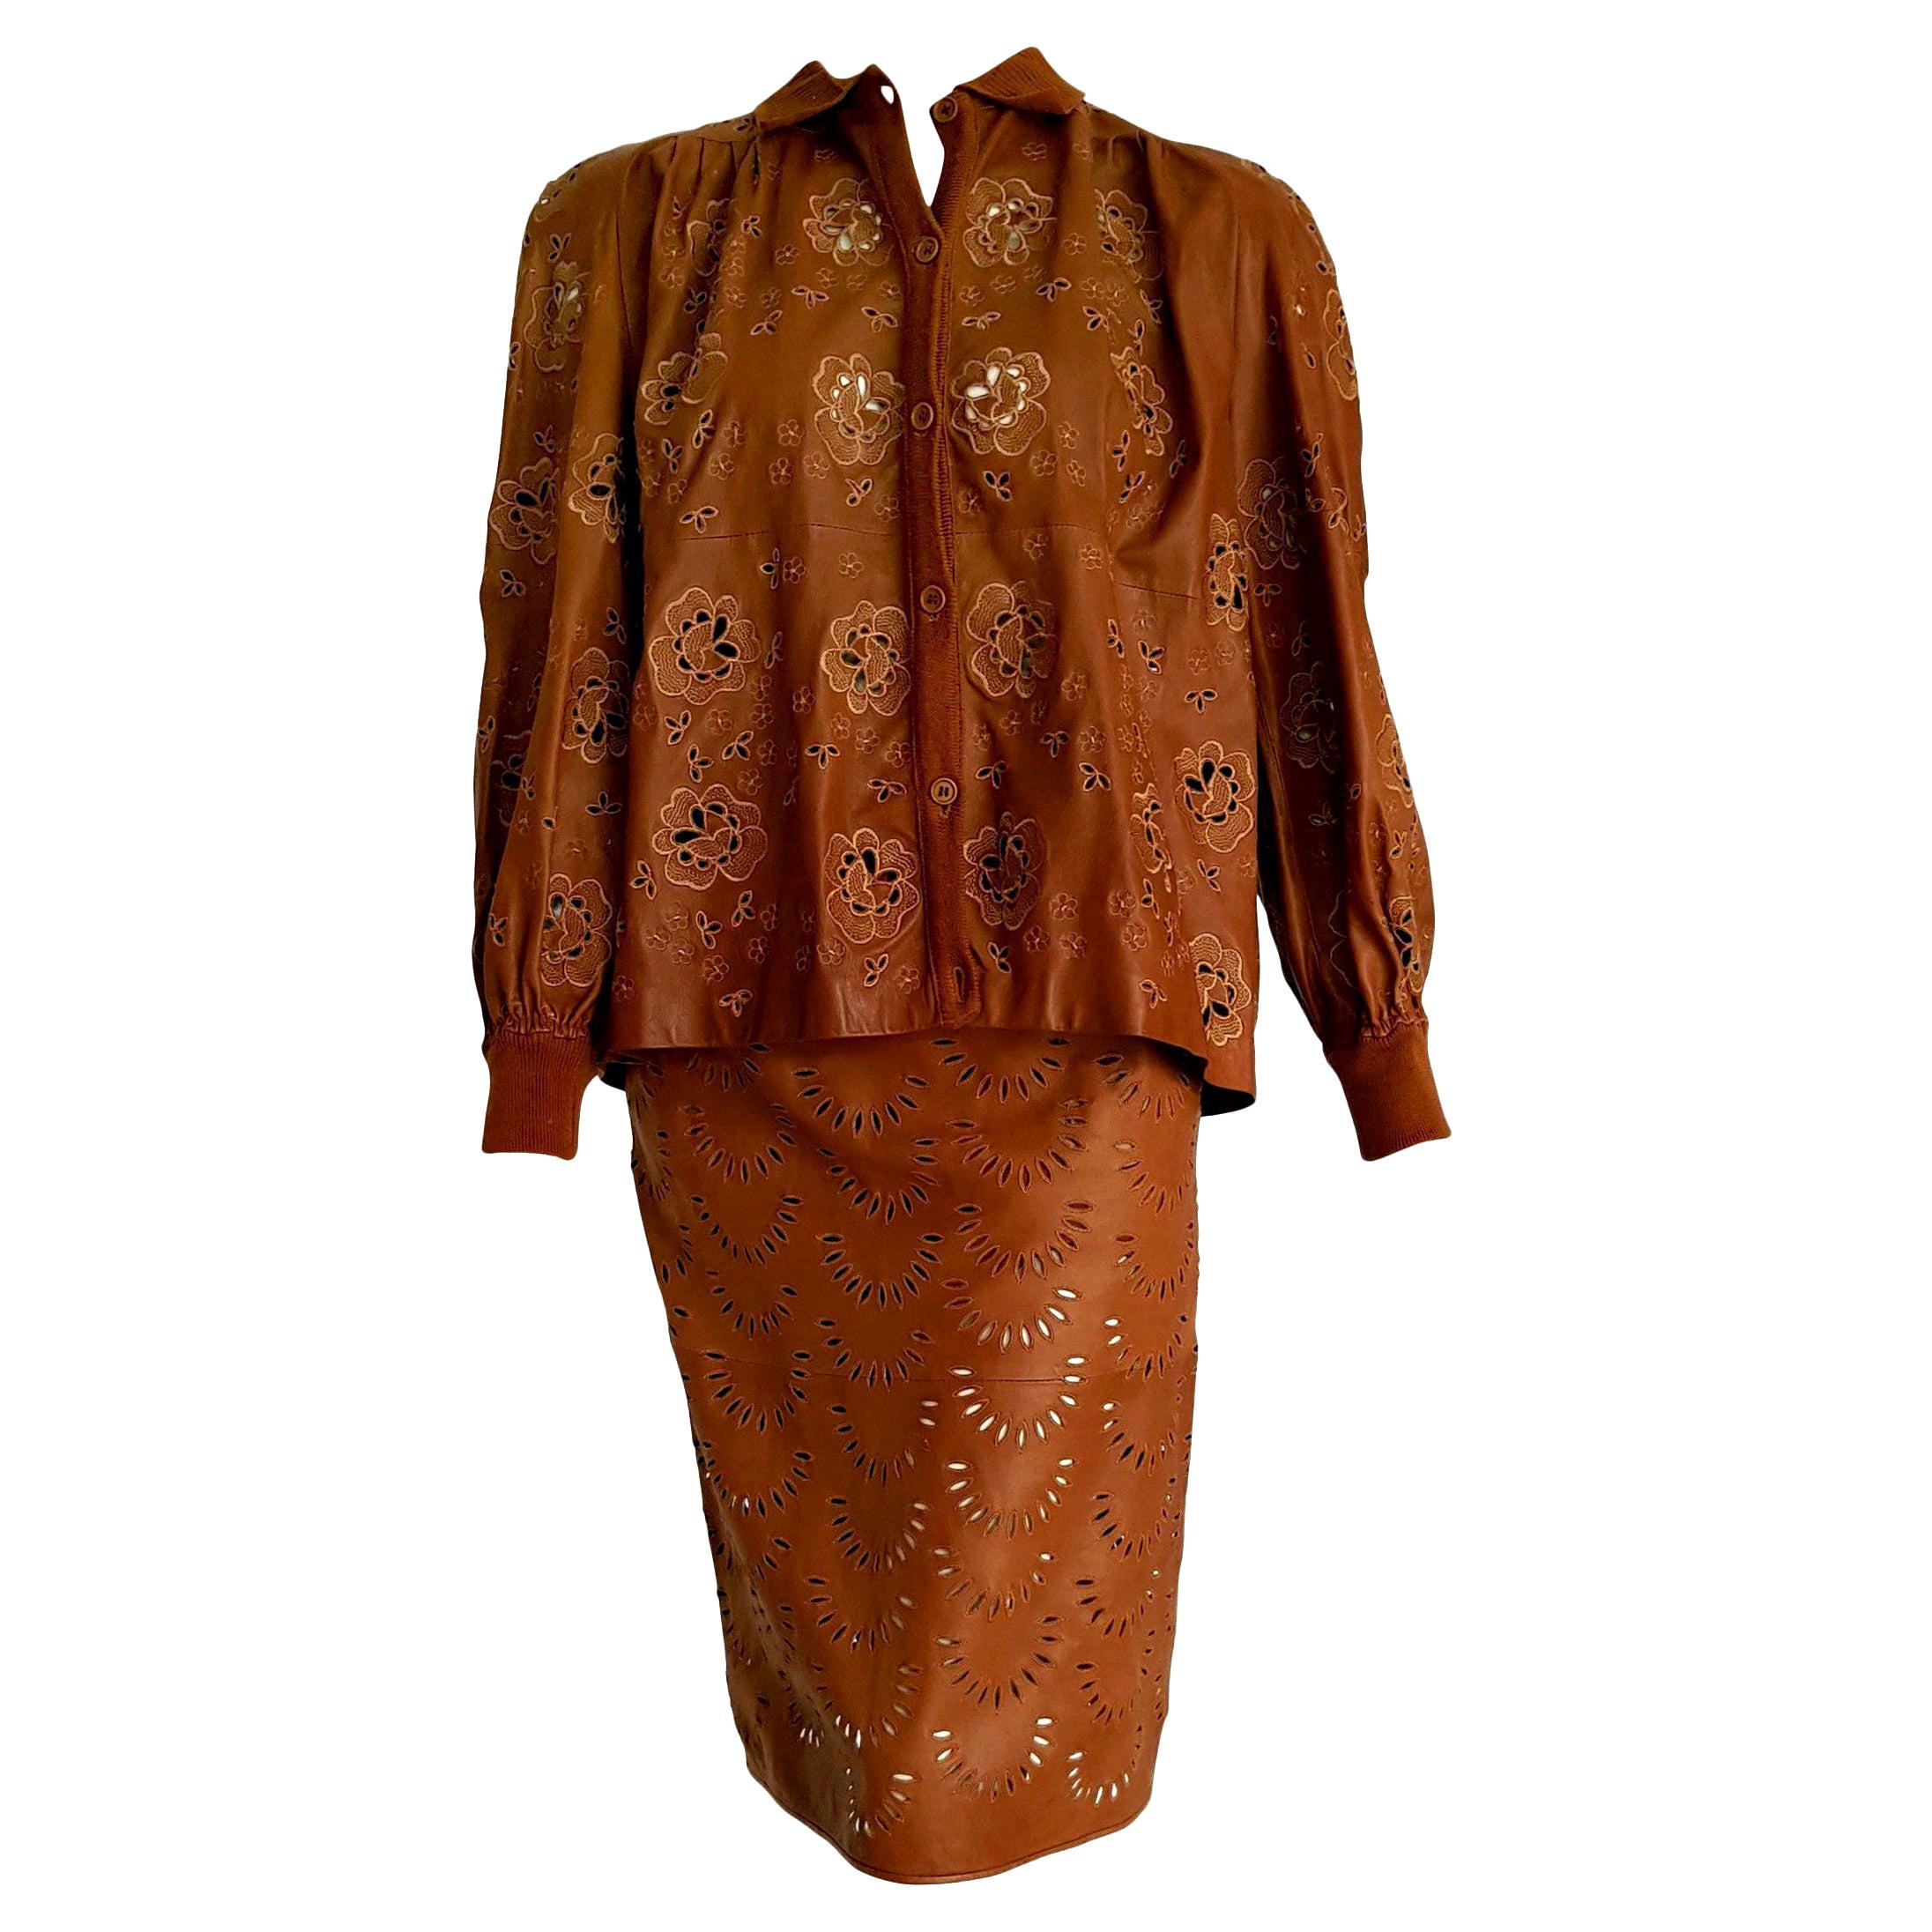 VALENTINO "New" Perforated Brown Leather Silk Embroidered Skirt Suit - Unworn For Sale